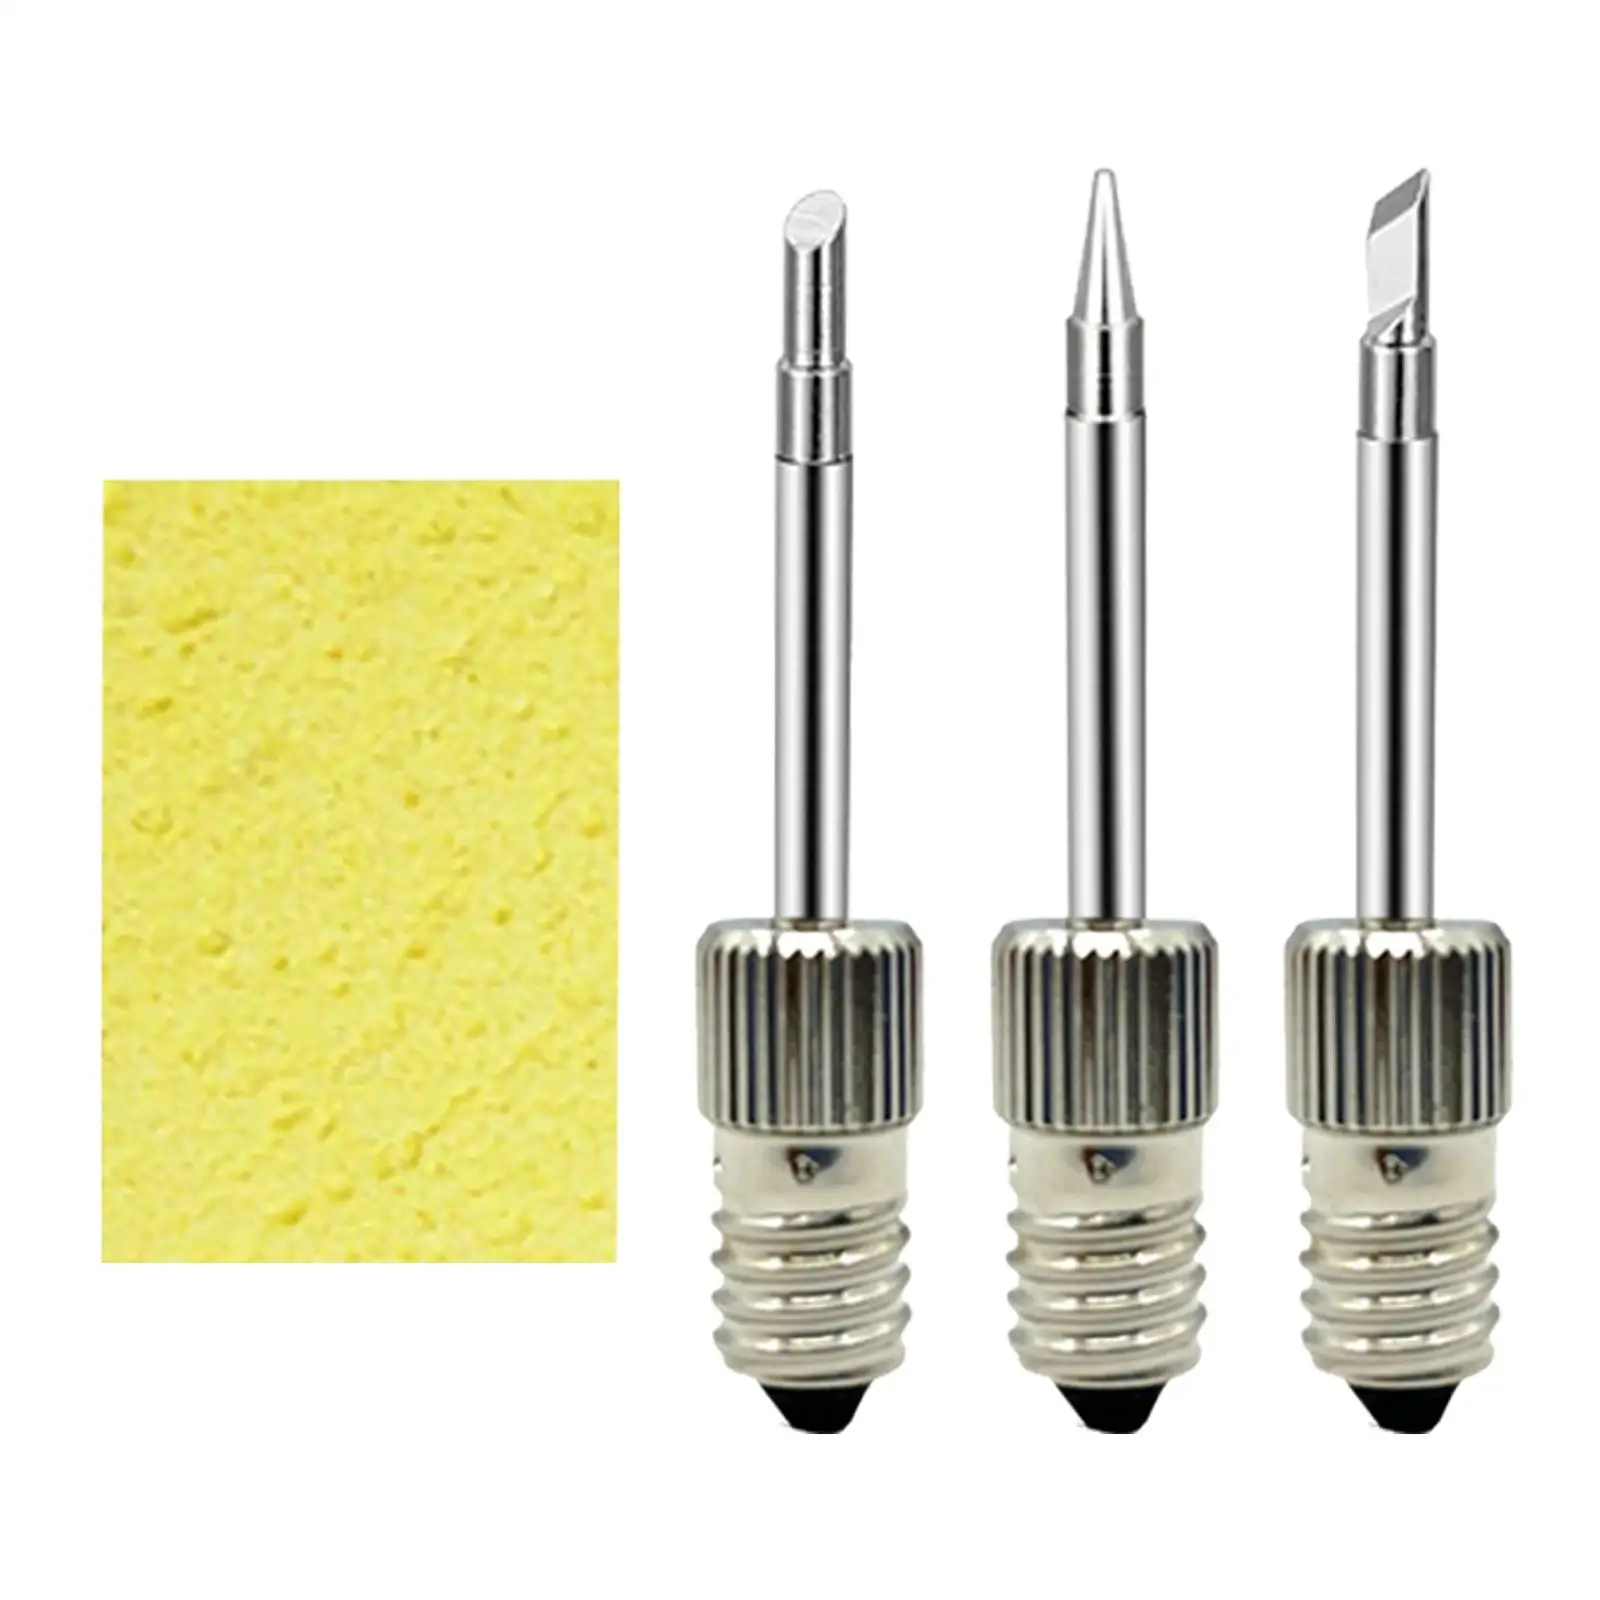 3Pcs Brass Soldering Tips Replacement USB Soldering for Soldering